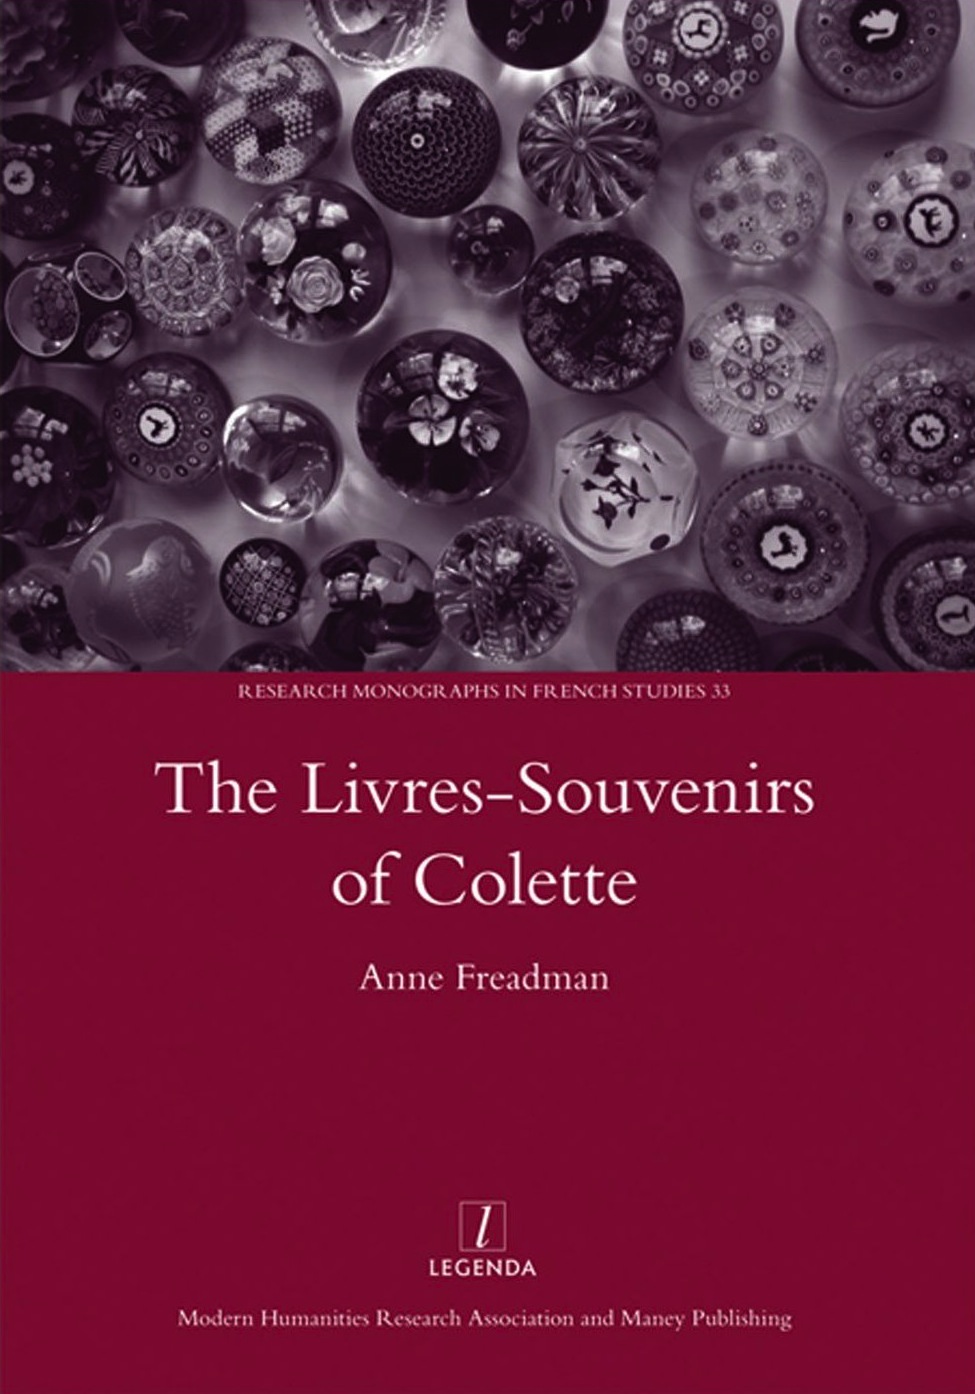 A. Freadman, The Livres-Souvenirs of Colette. Genre and the Telling of Time